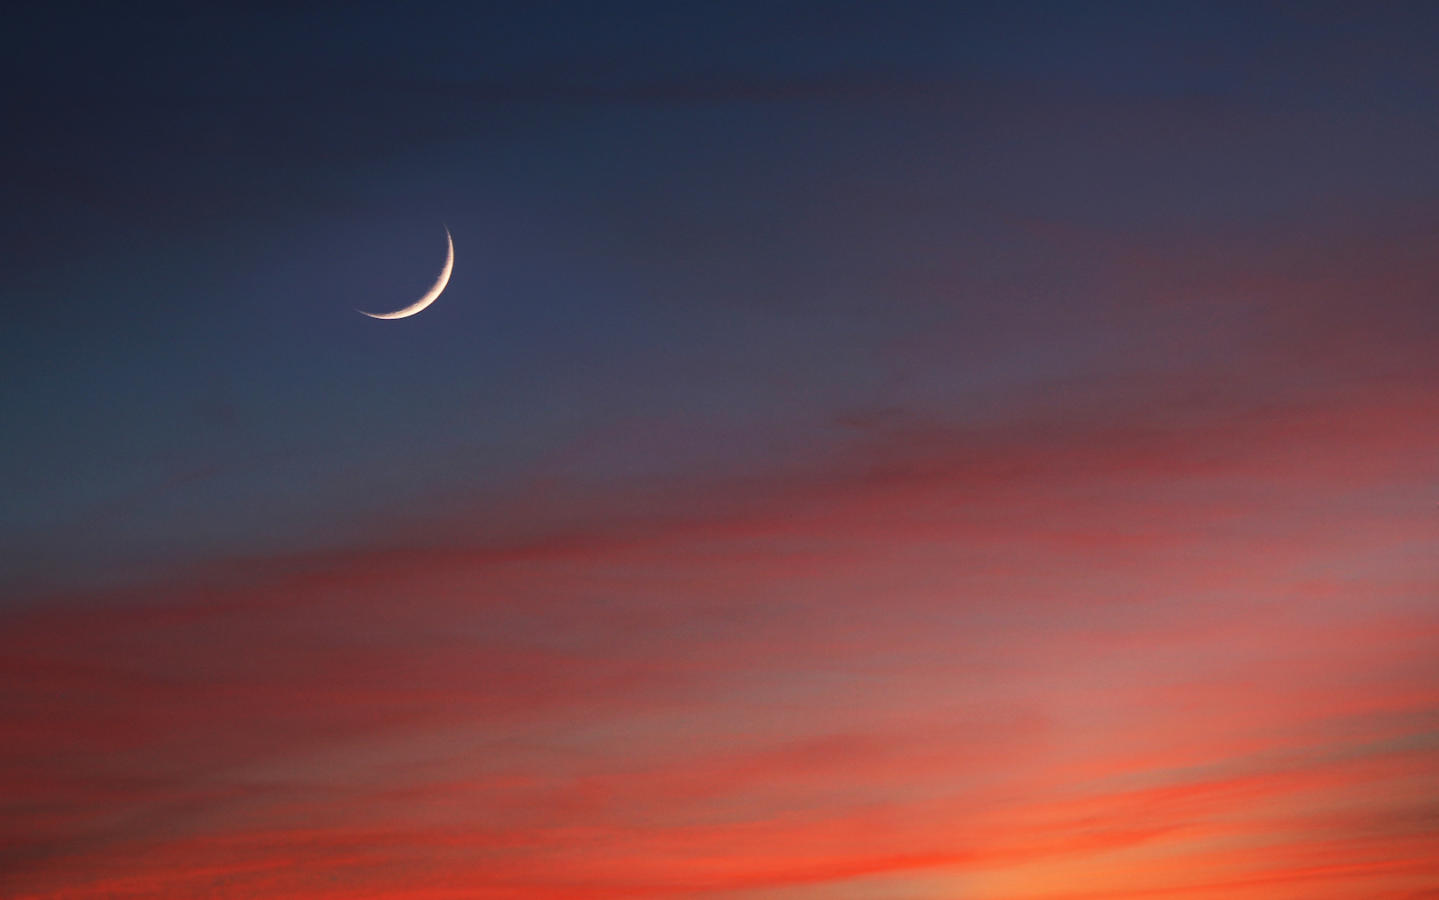 Crescent Moon in Glowing Sunset Skies